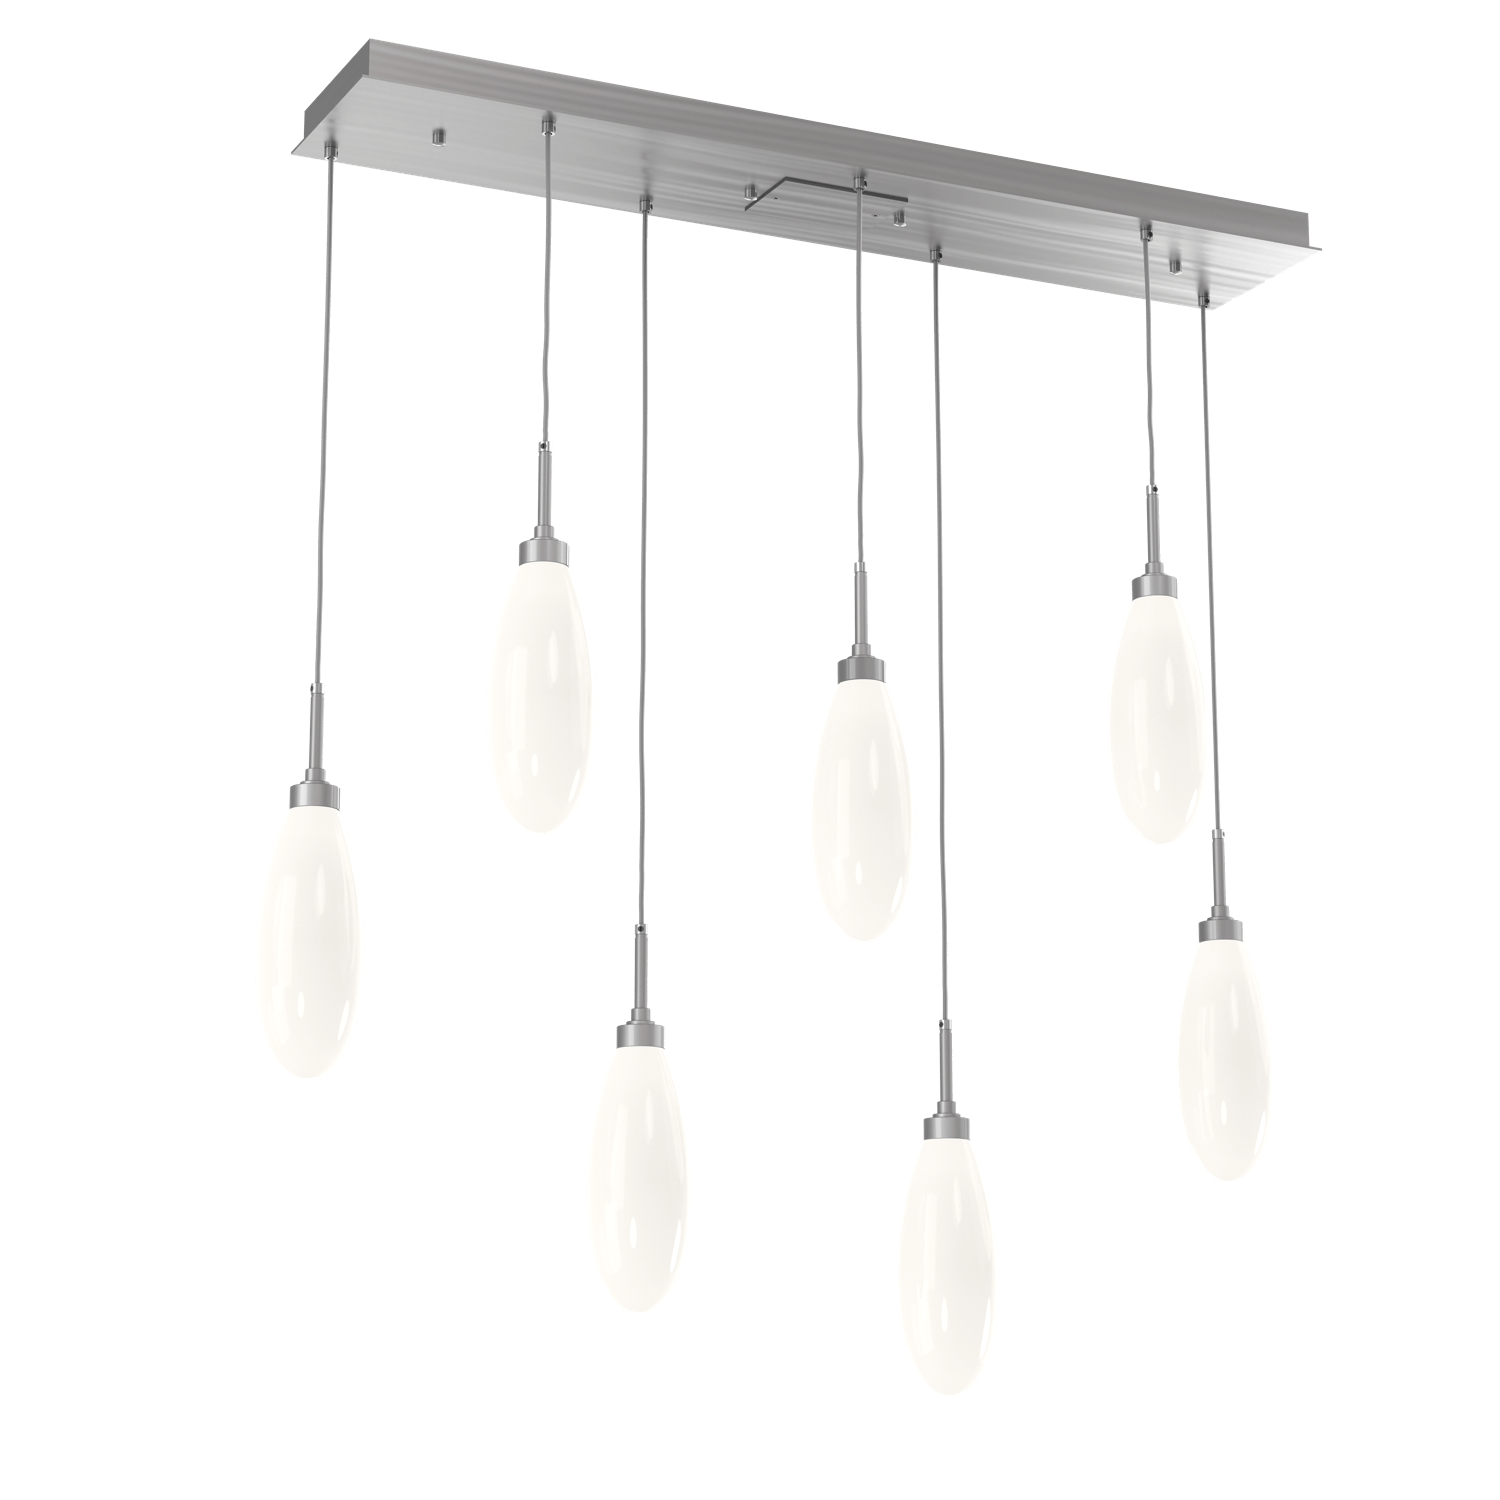 PLB0071-07-SN-WL-LL-Hammerton-Studio-Fiori-7-light-linear-pendant-chandelier-with-satin-nickel-finish-and-opal-white-glass-shades-and-LED-lamping